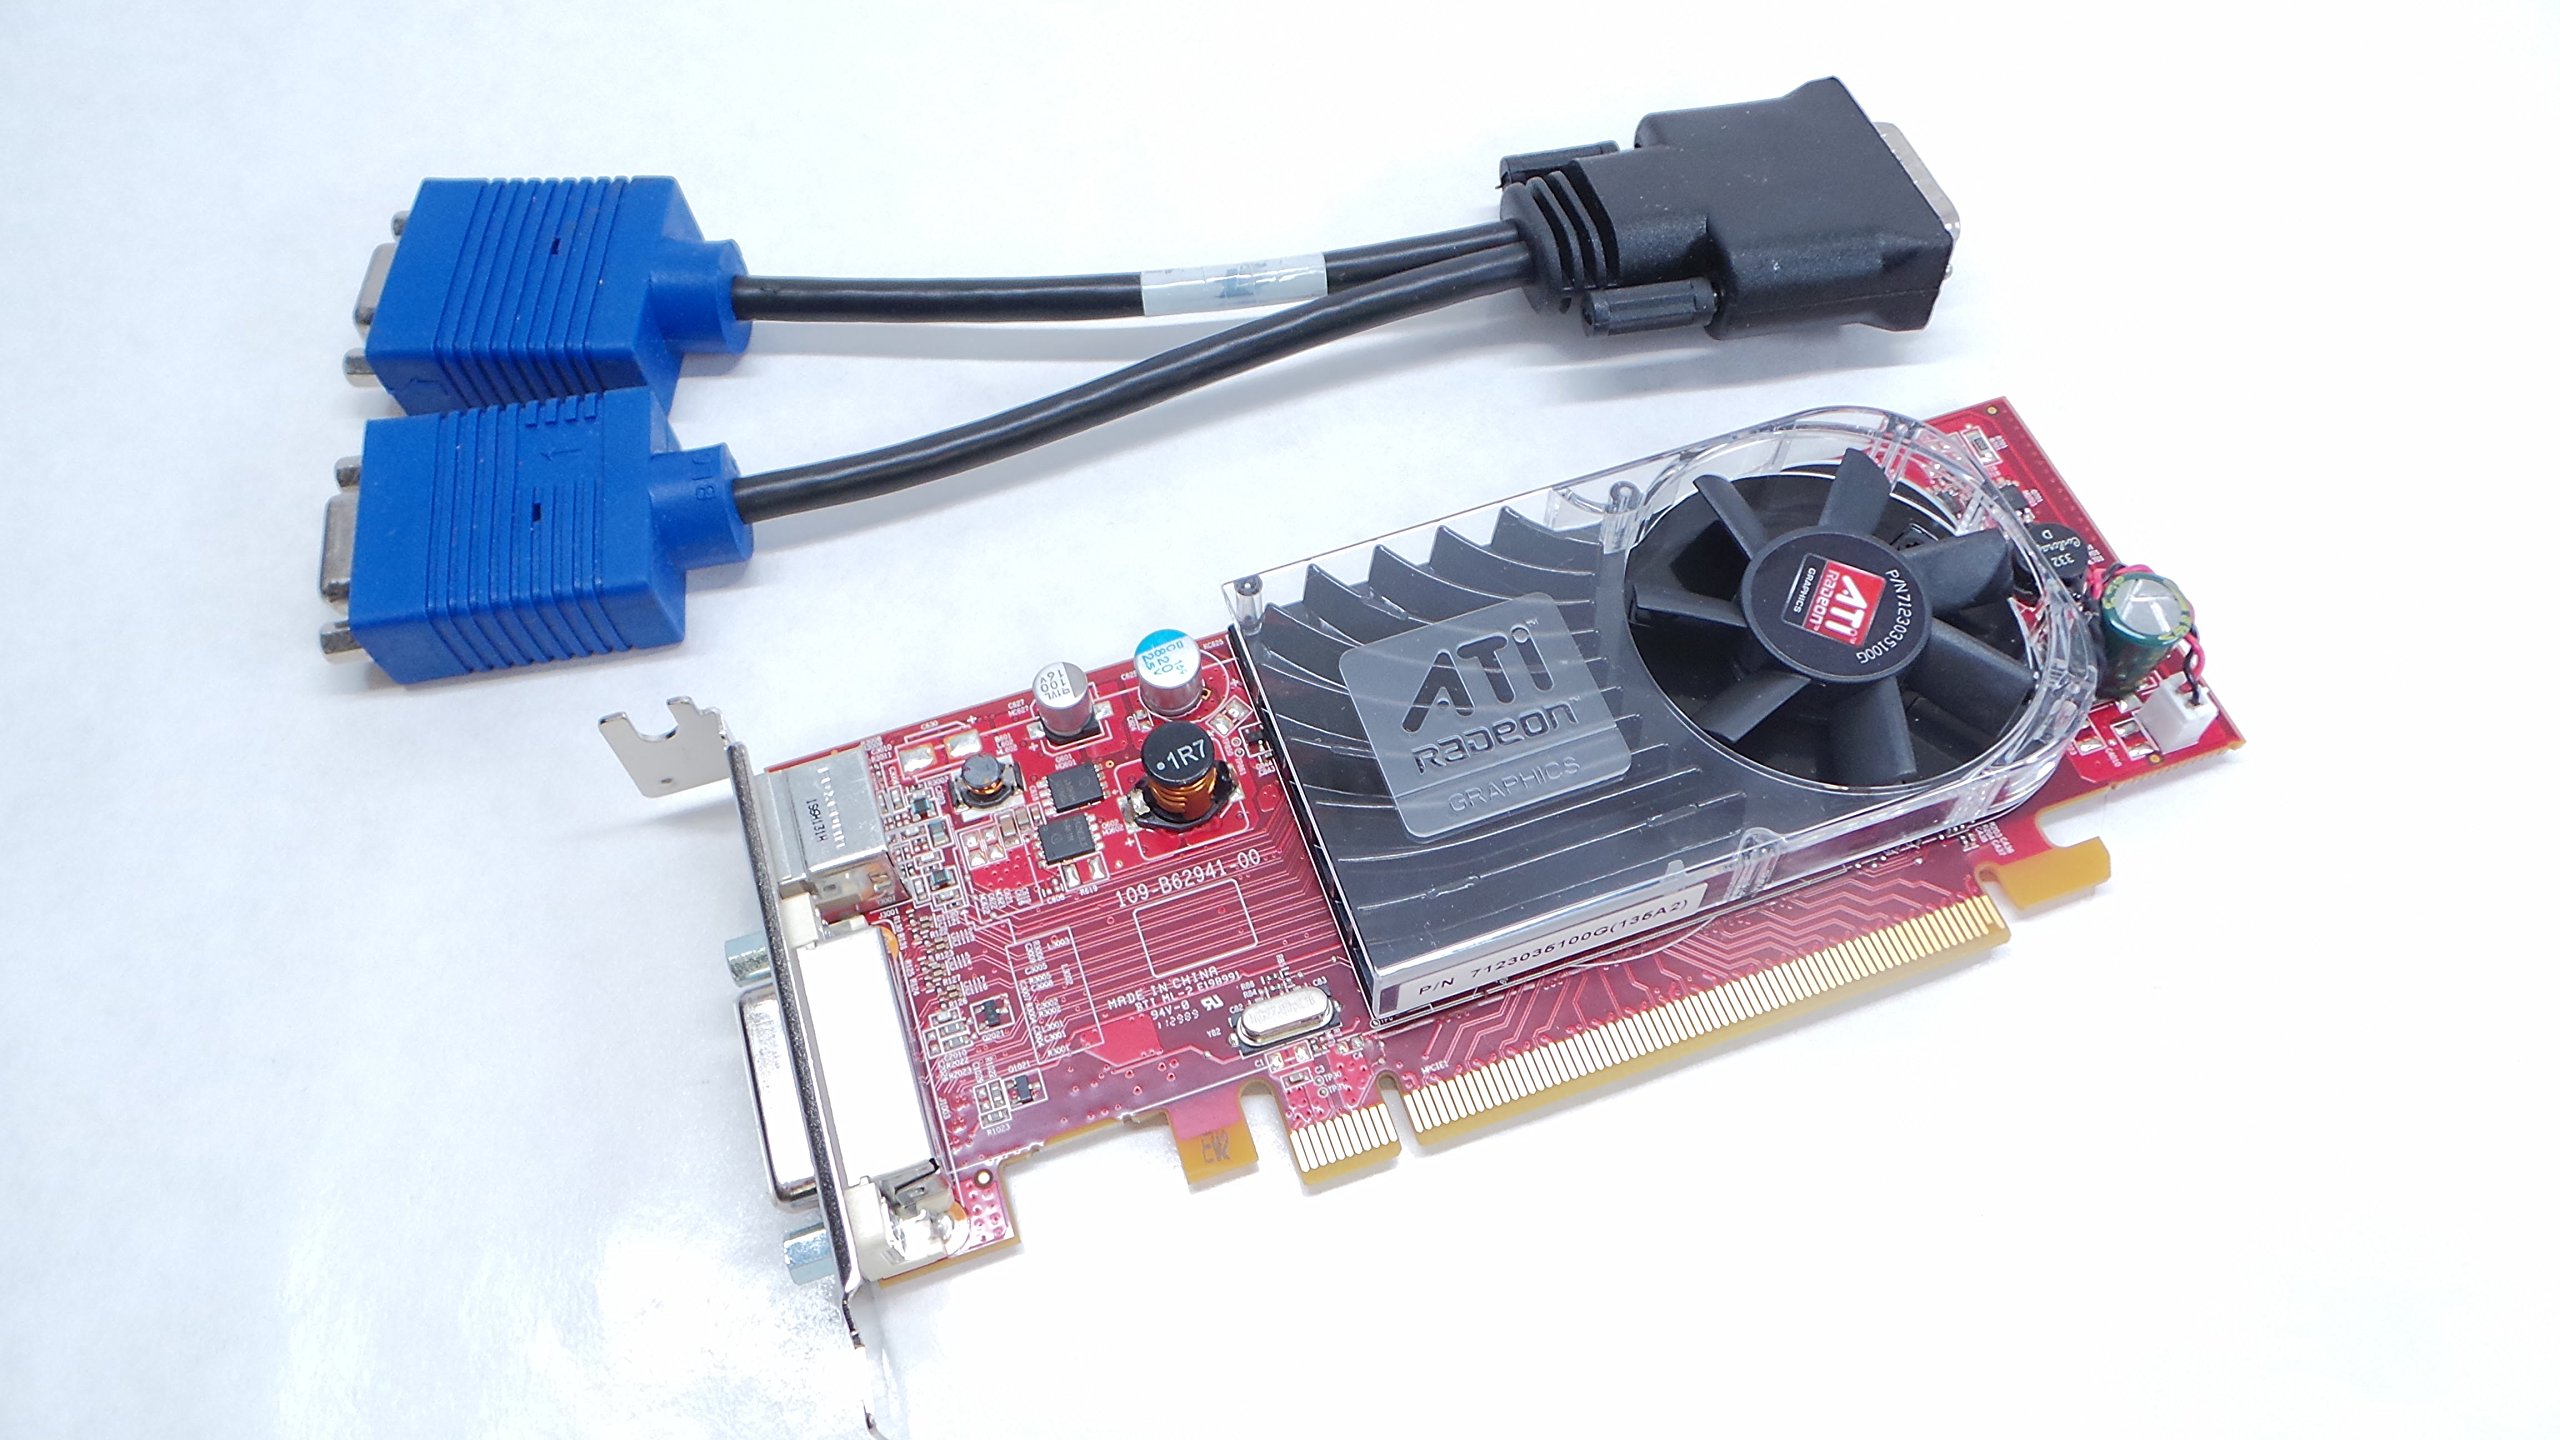 Dell Y103D DMS-59 Ati Radeon HD 3450 Low Profile Video Graphic Card with Dual VGA Splitter Adapter dongle PCI-e x16 256MB 0Y1